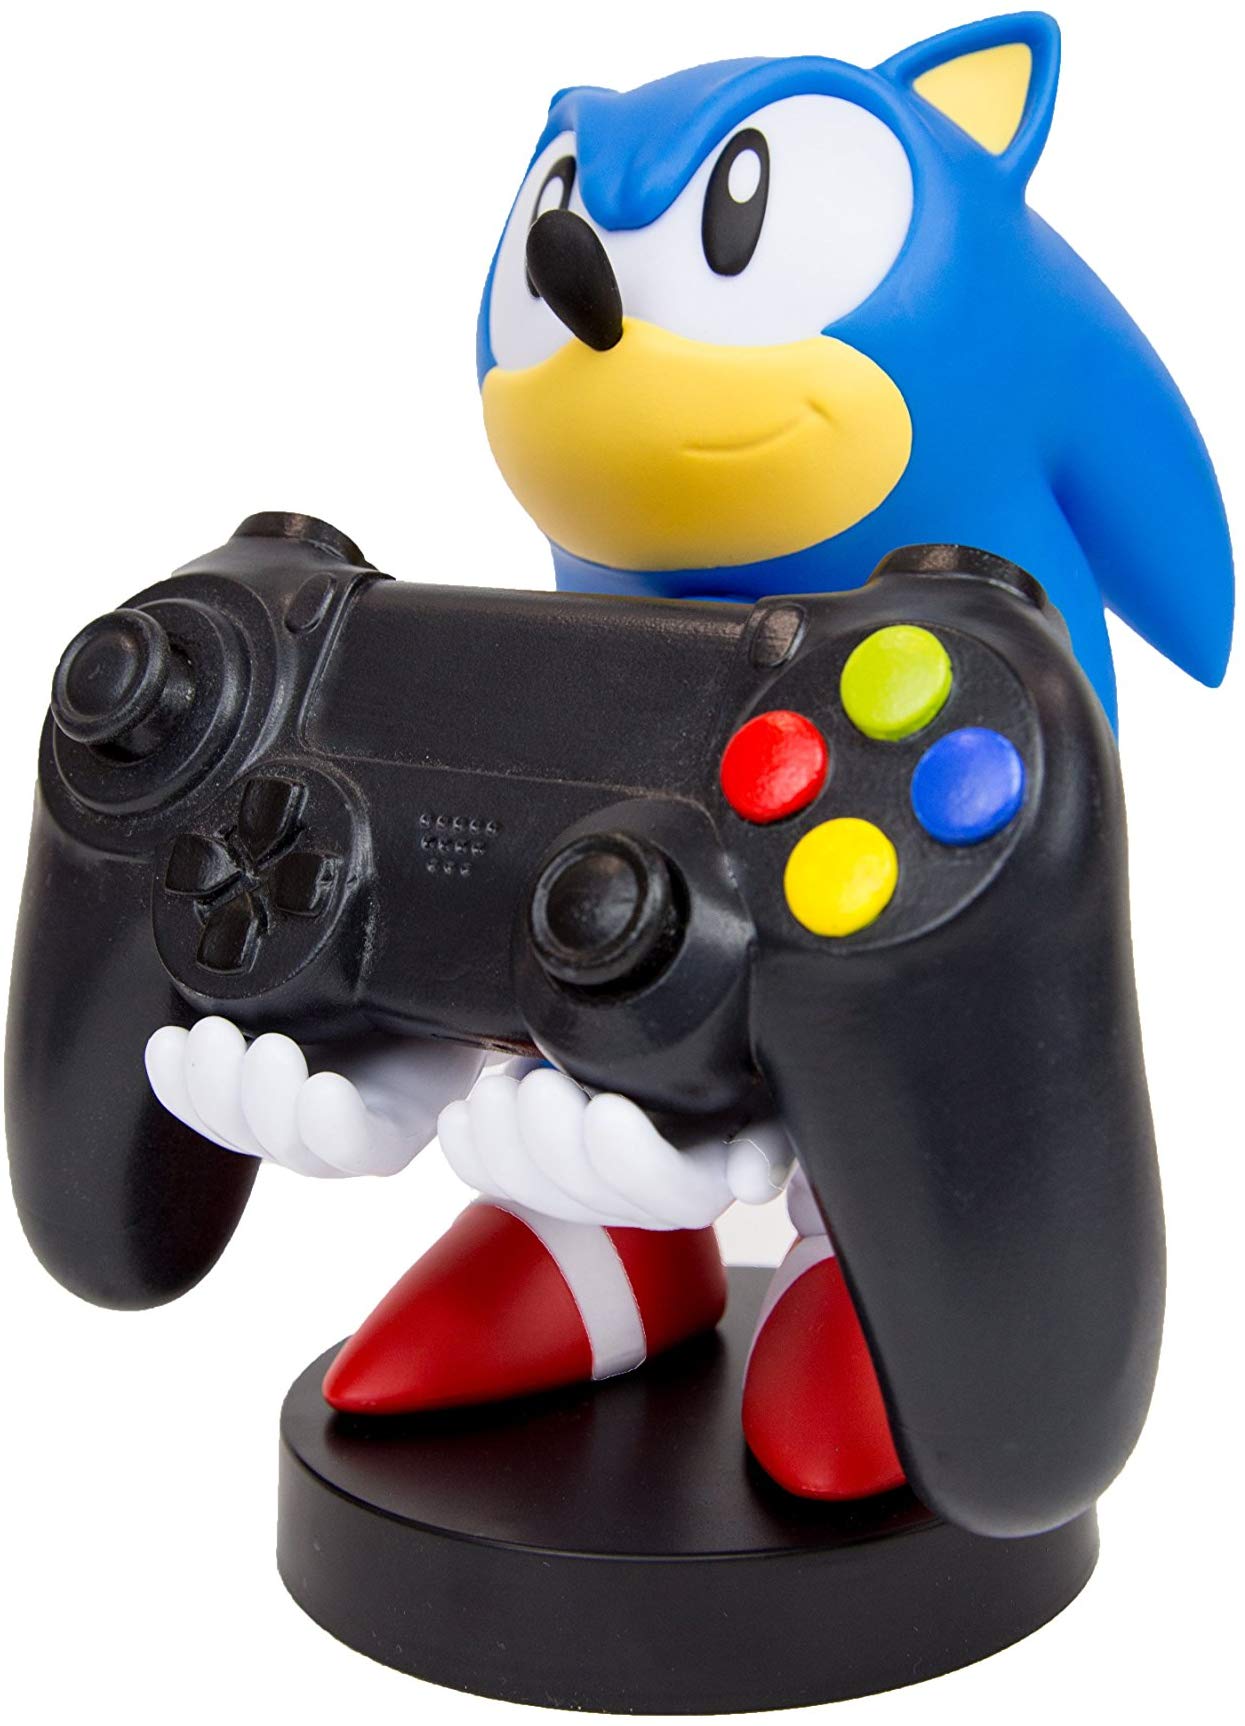 Sonic device holder for gamers